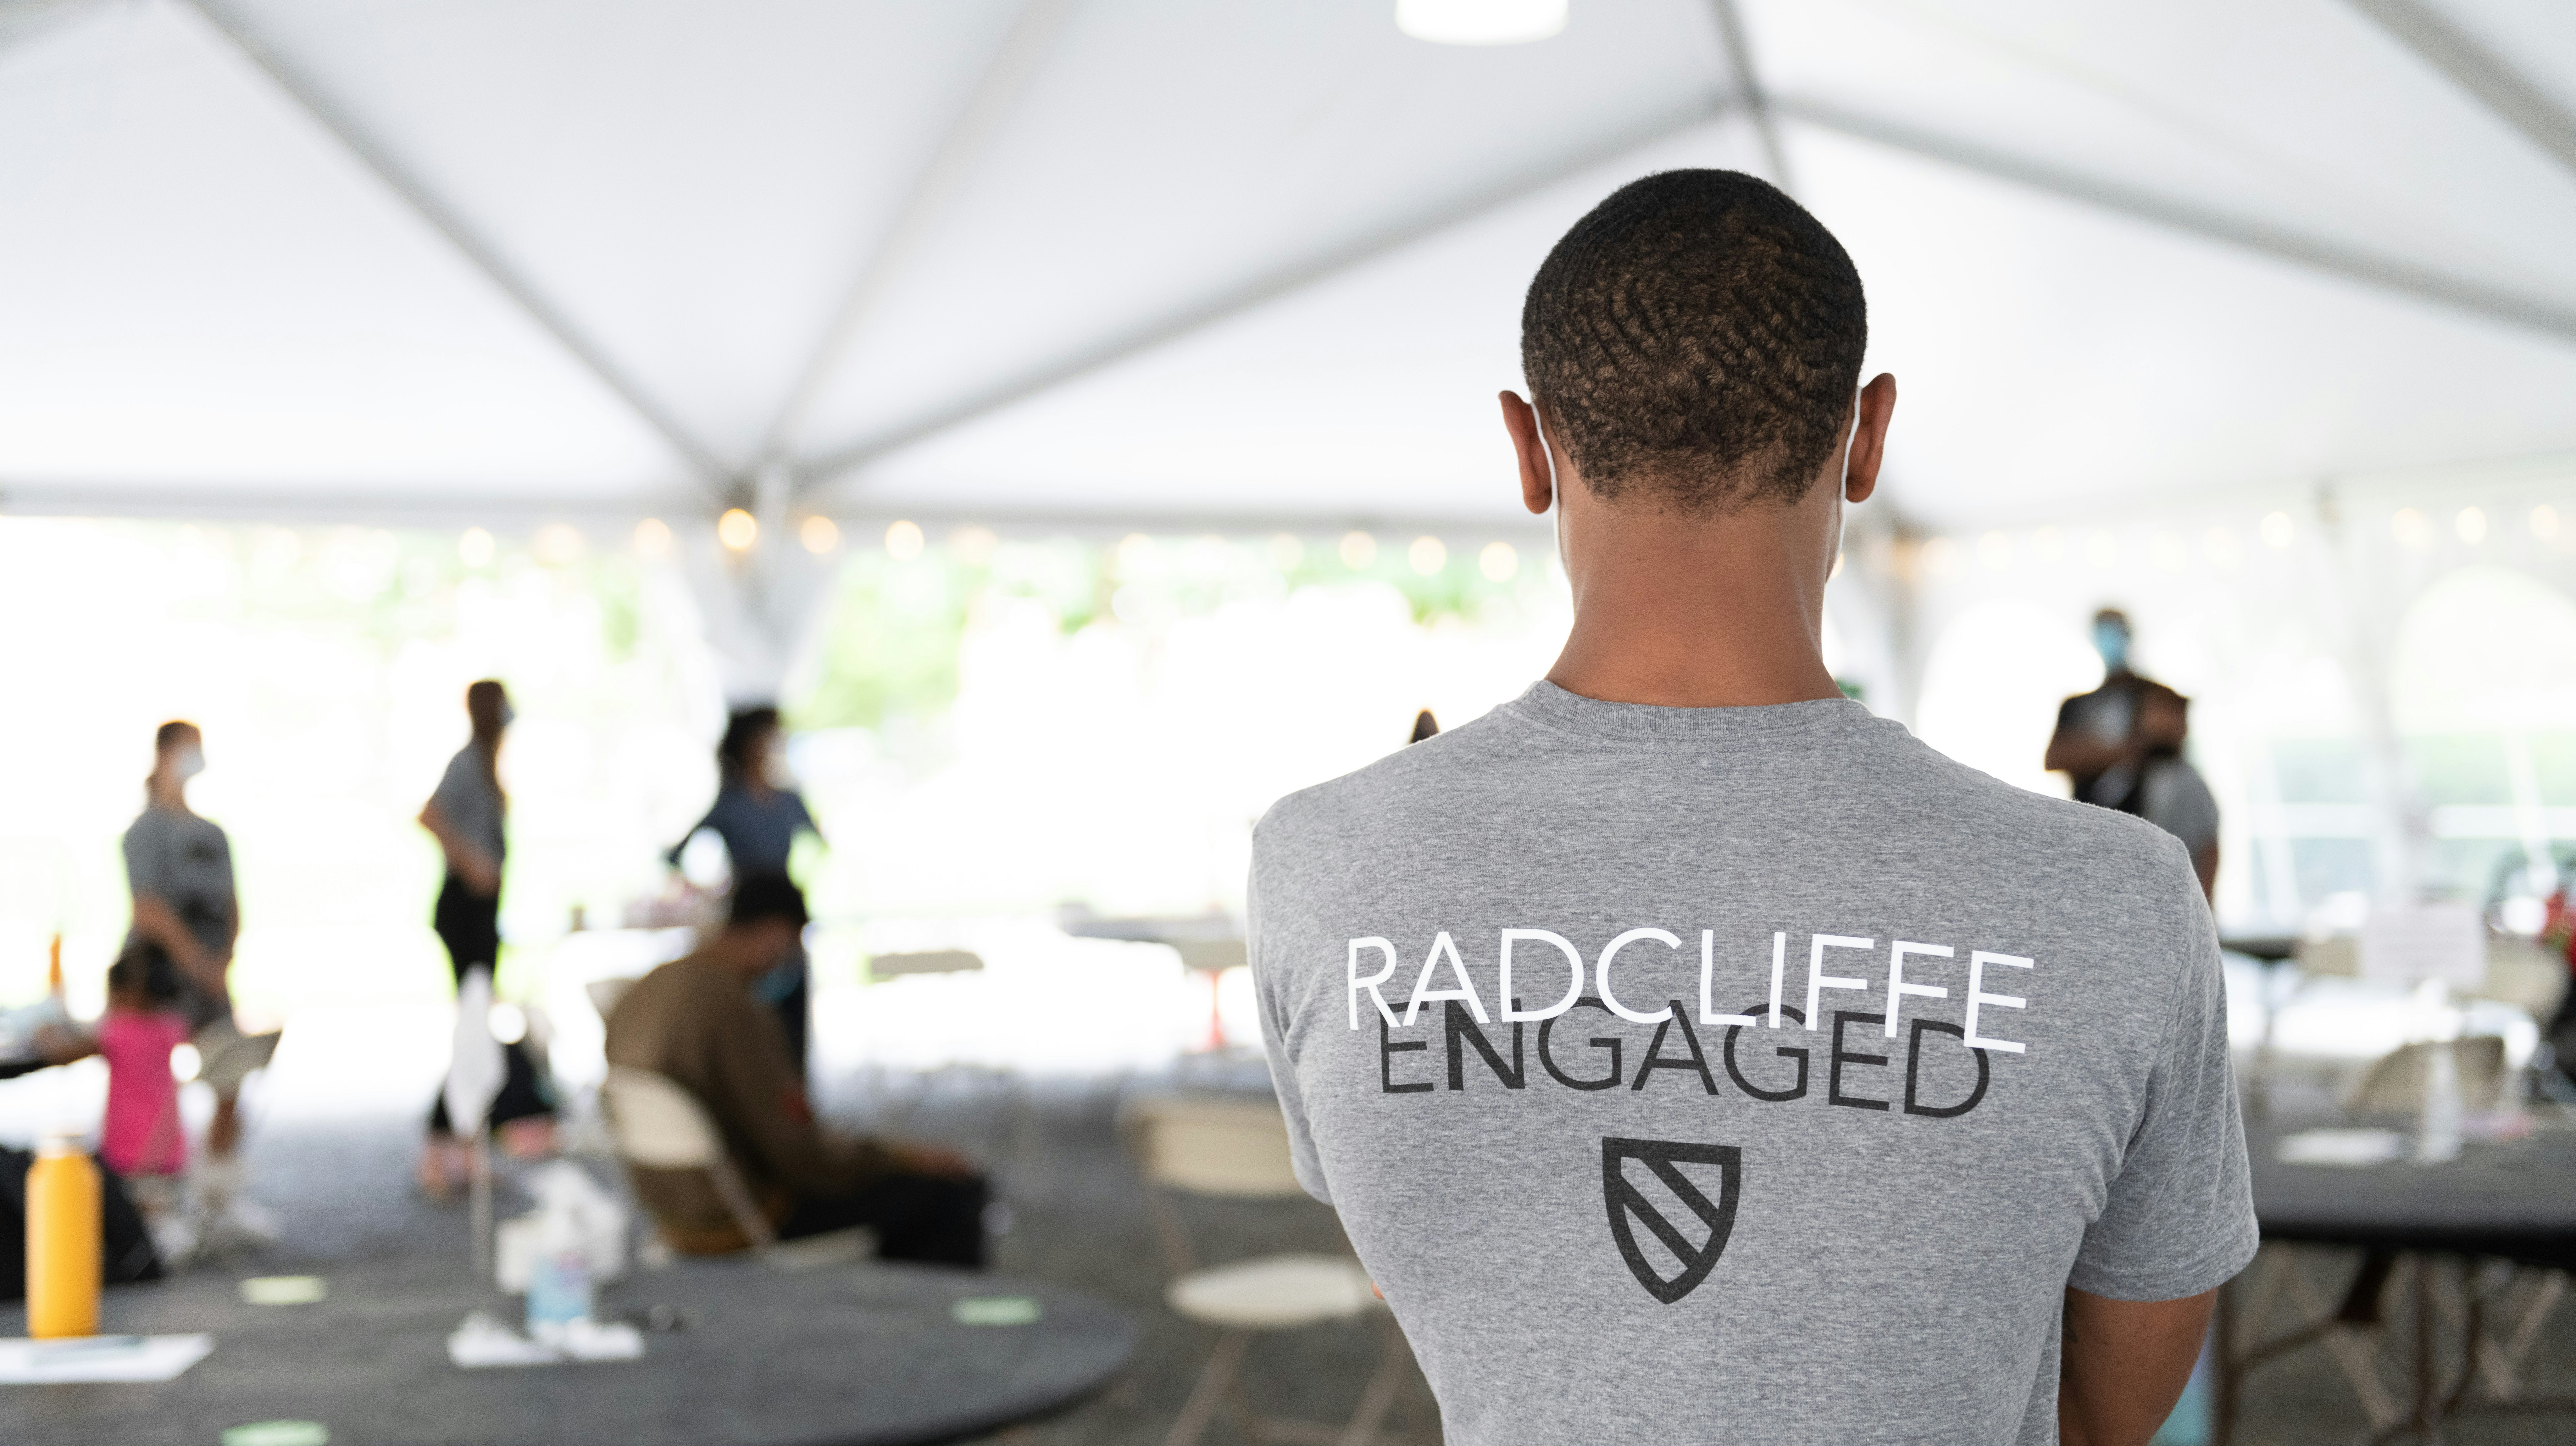 A student stands with his back to the camera in a tent in Radcliffe Yard. His t-shirt reads "Radcliffe Engaged" and displays the Radcliffe shield.